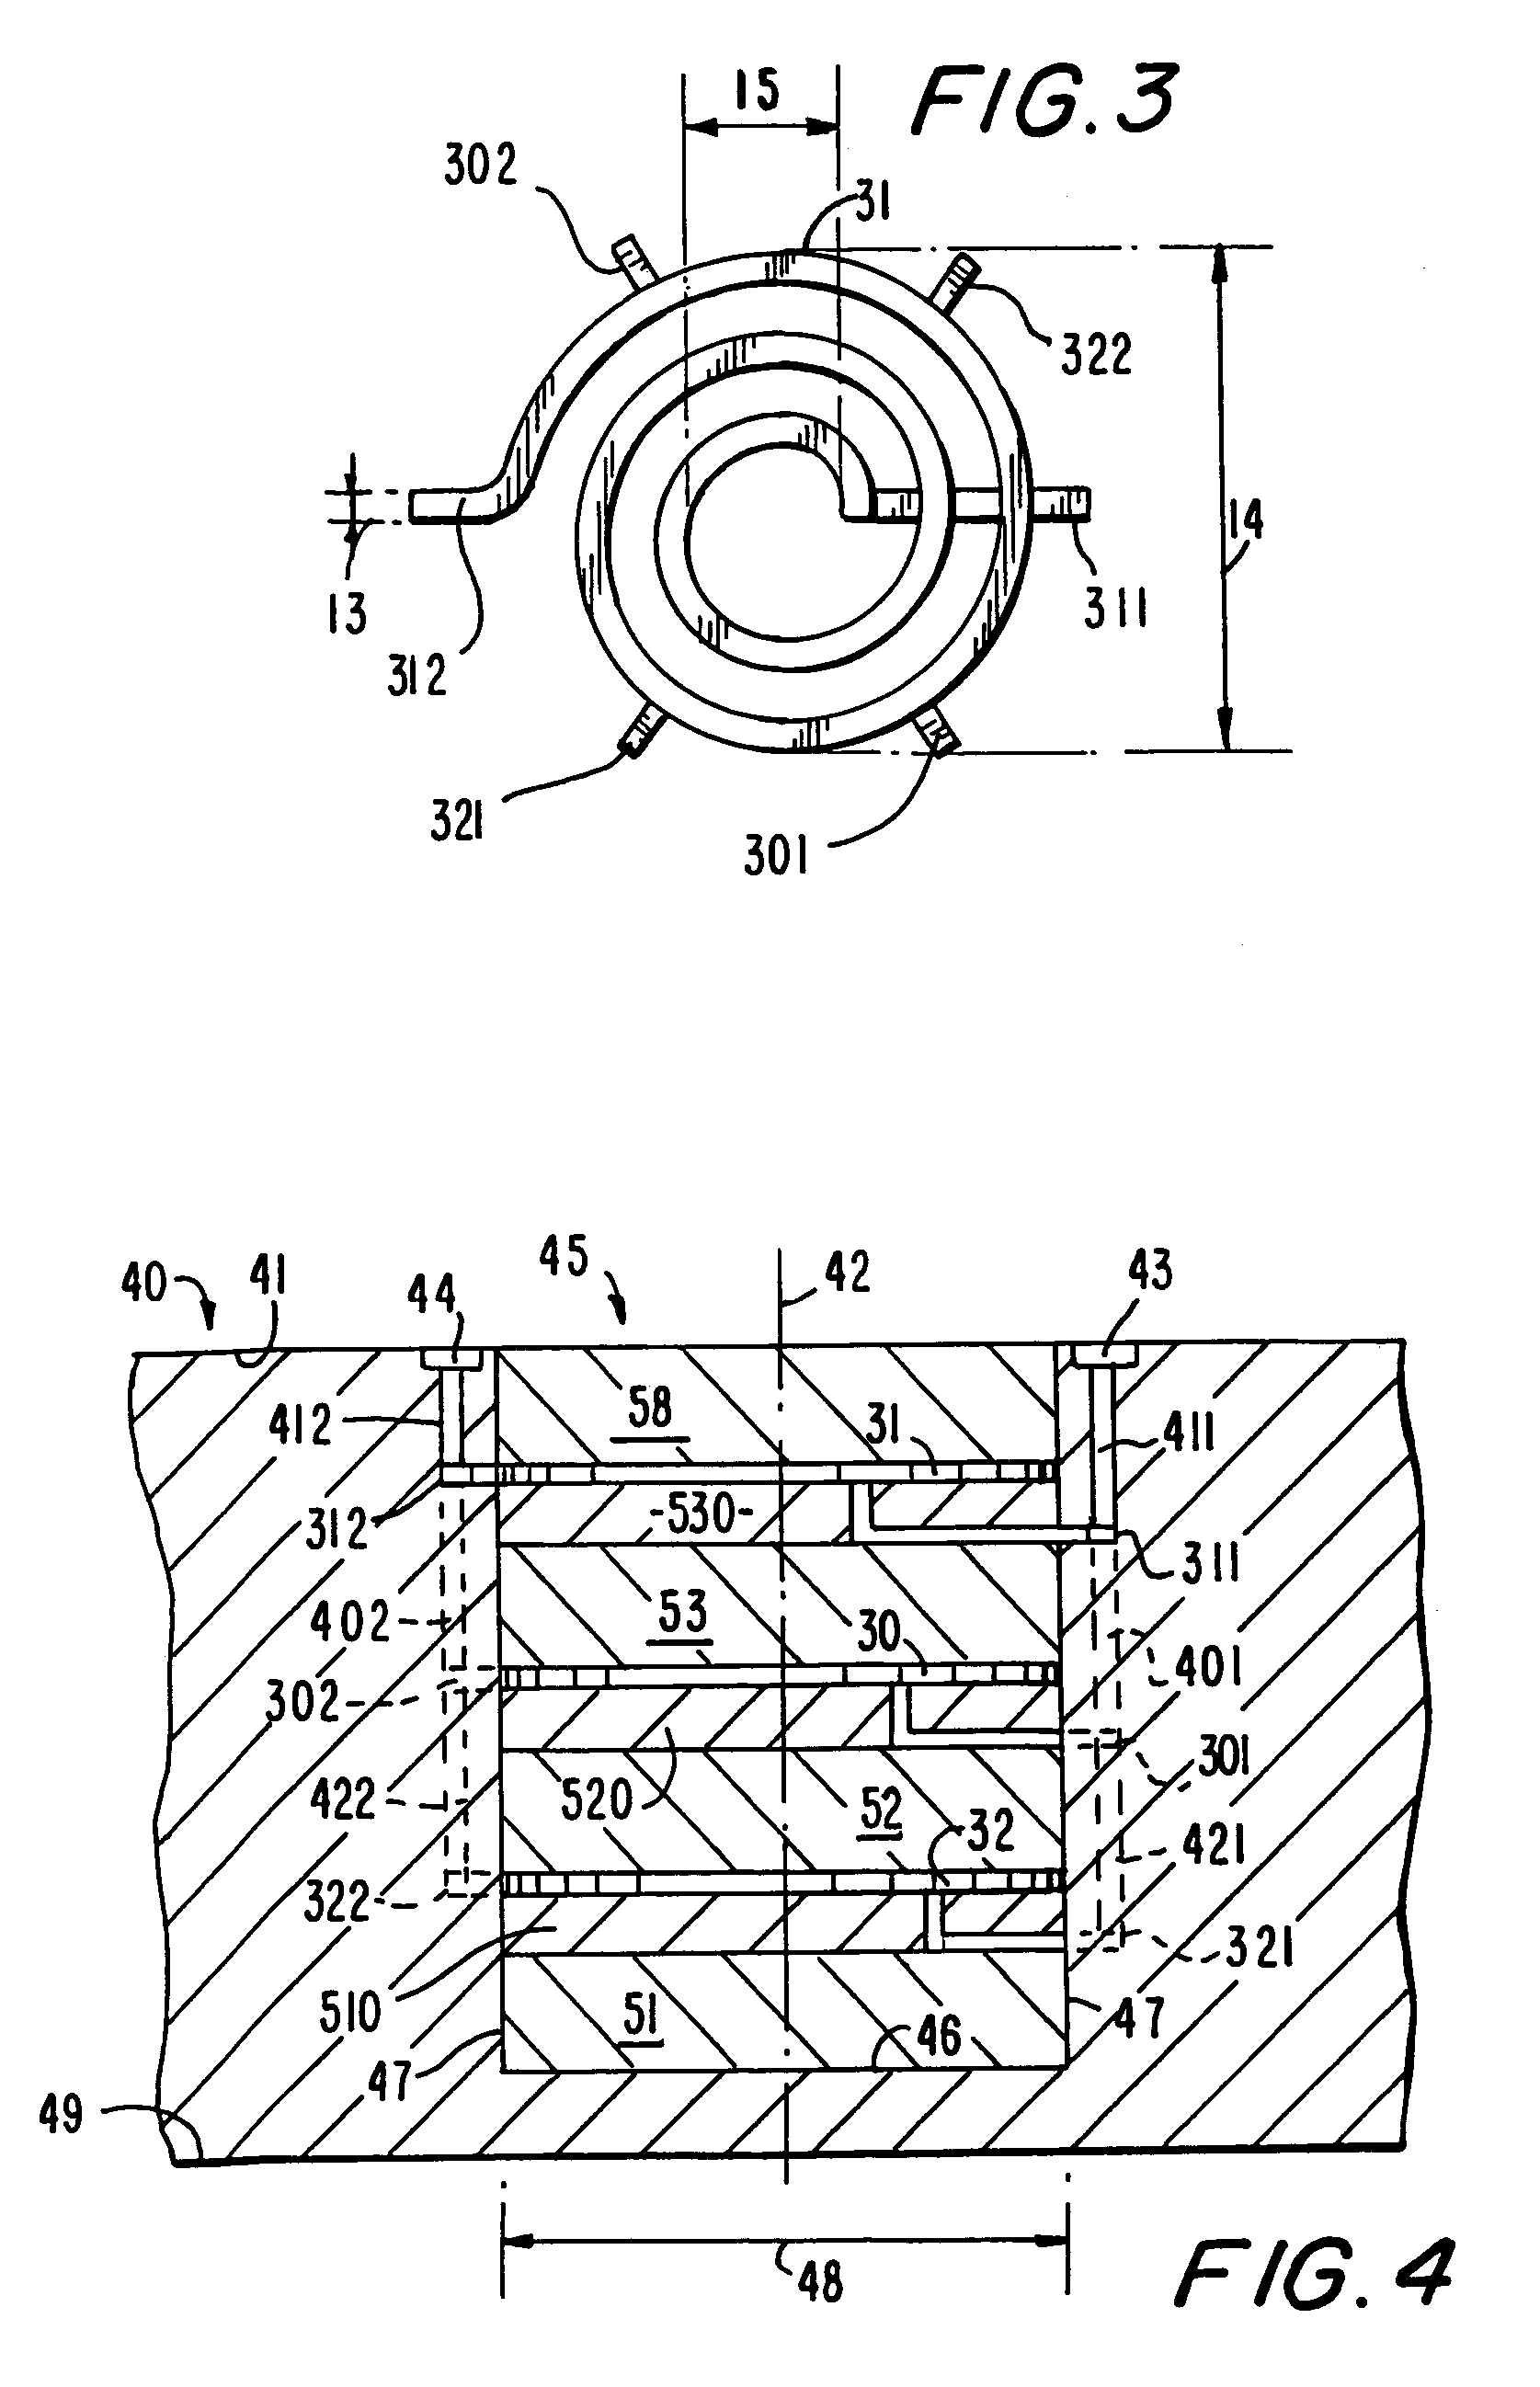 Semiconductor device with electrically coupled spiral inductors